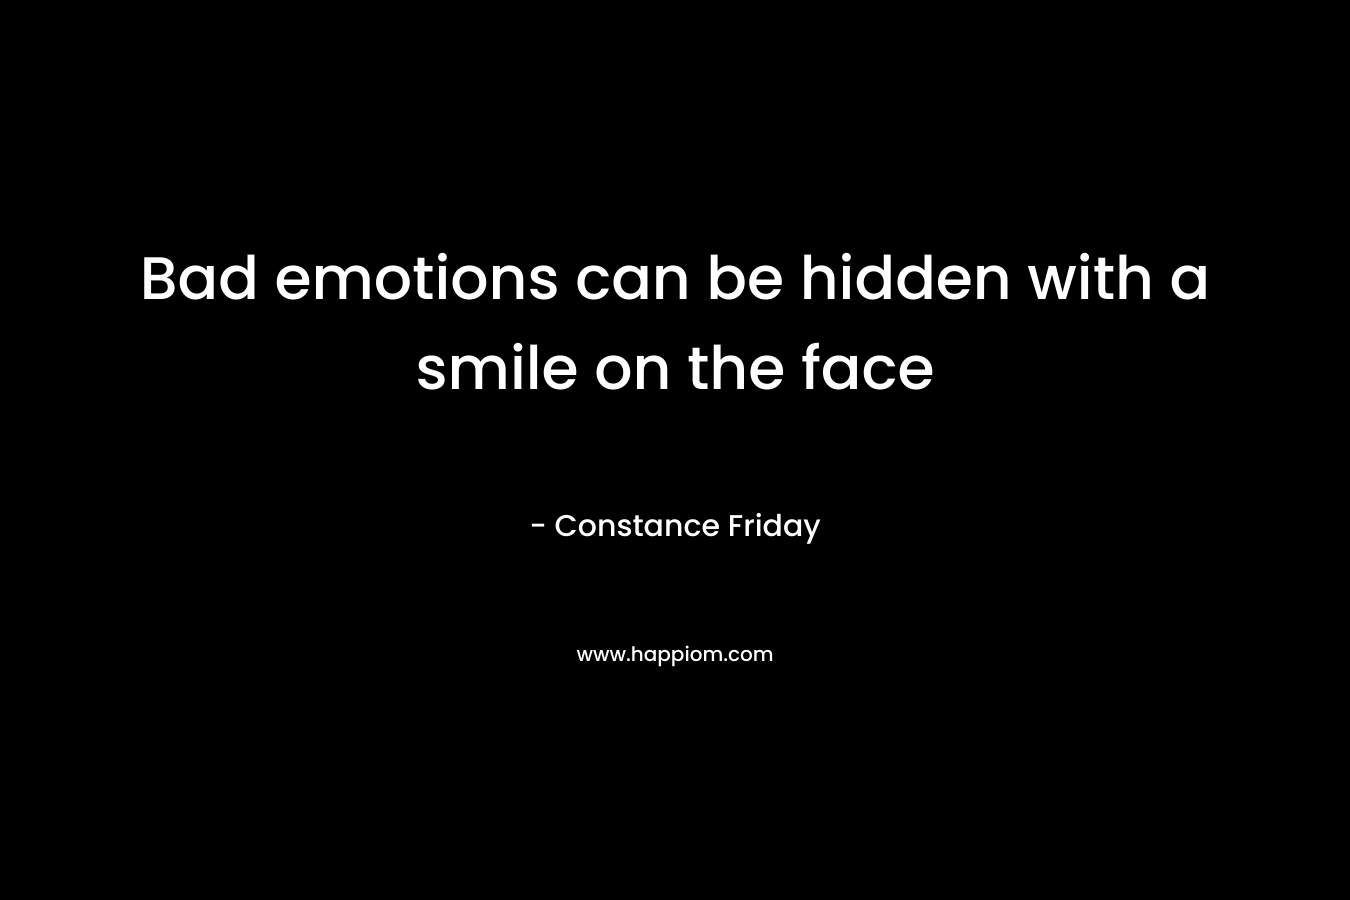 Bad emotions can be hidden with a smile on the face